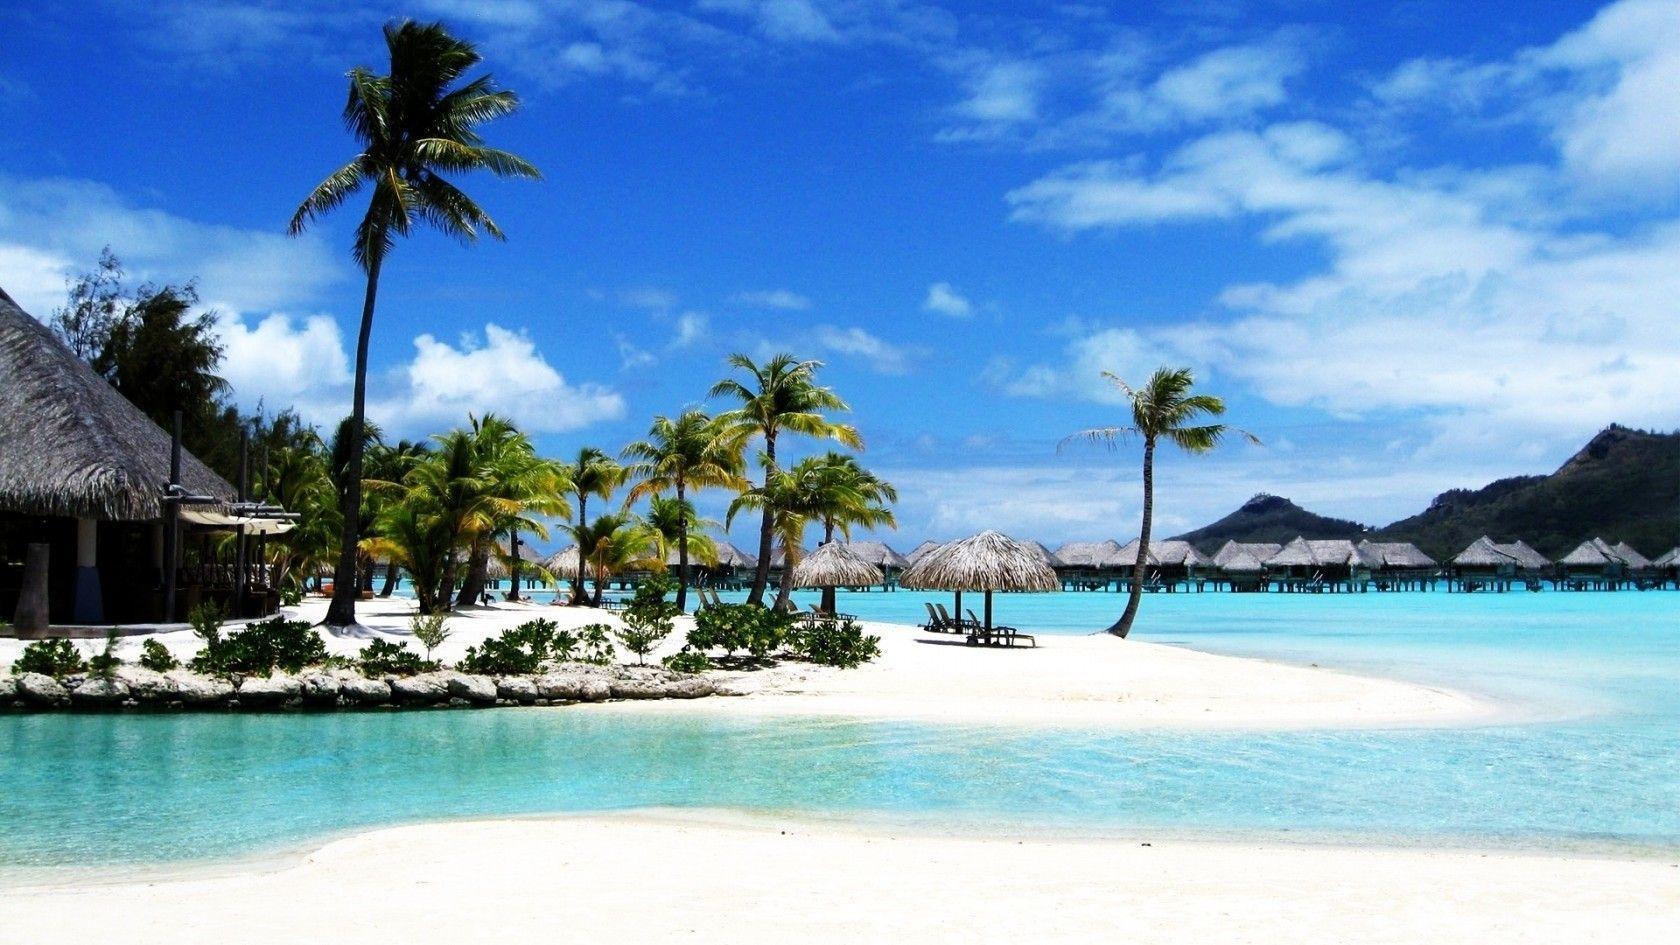 image For > Tropical Beach Wallpaper